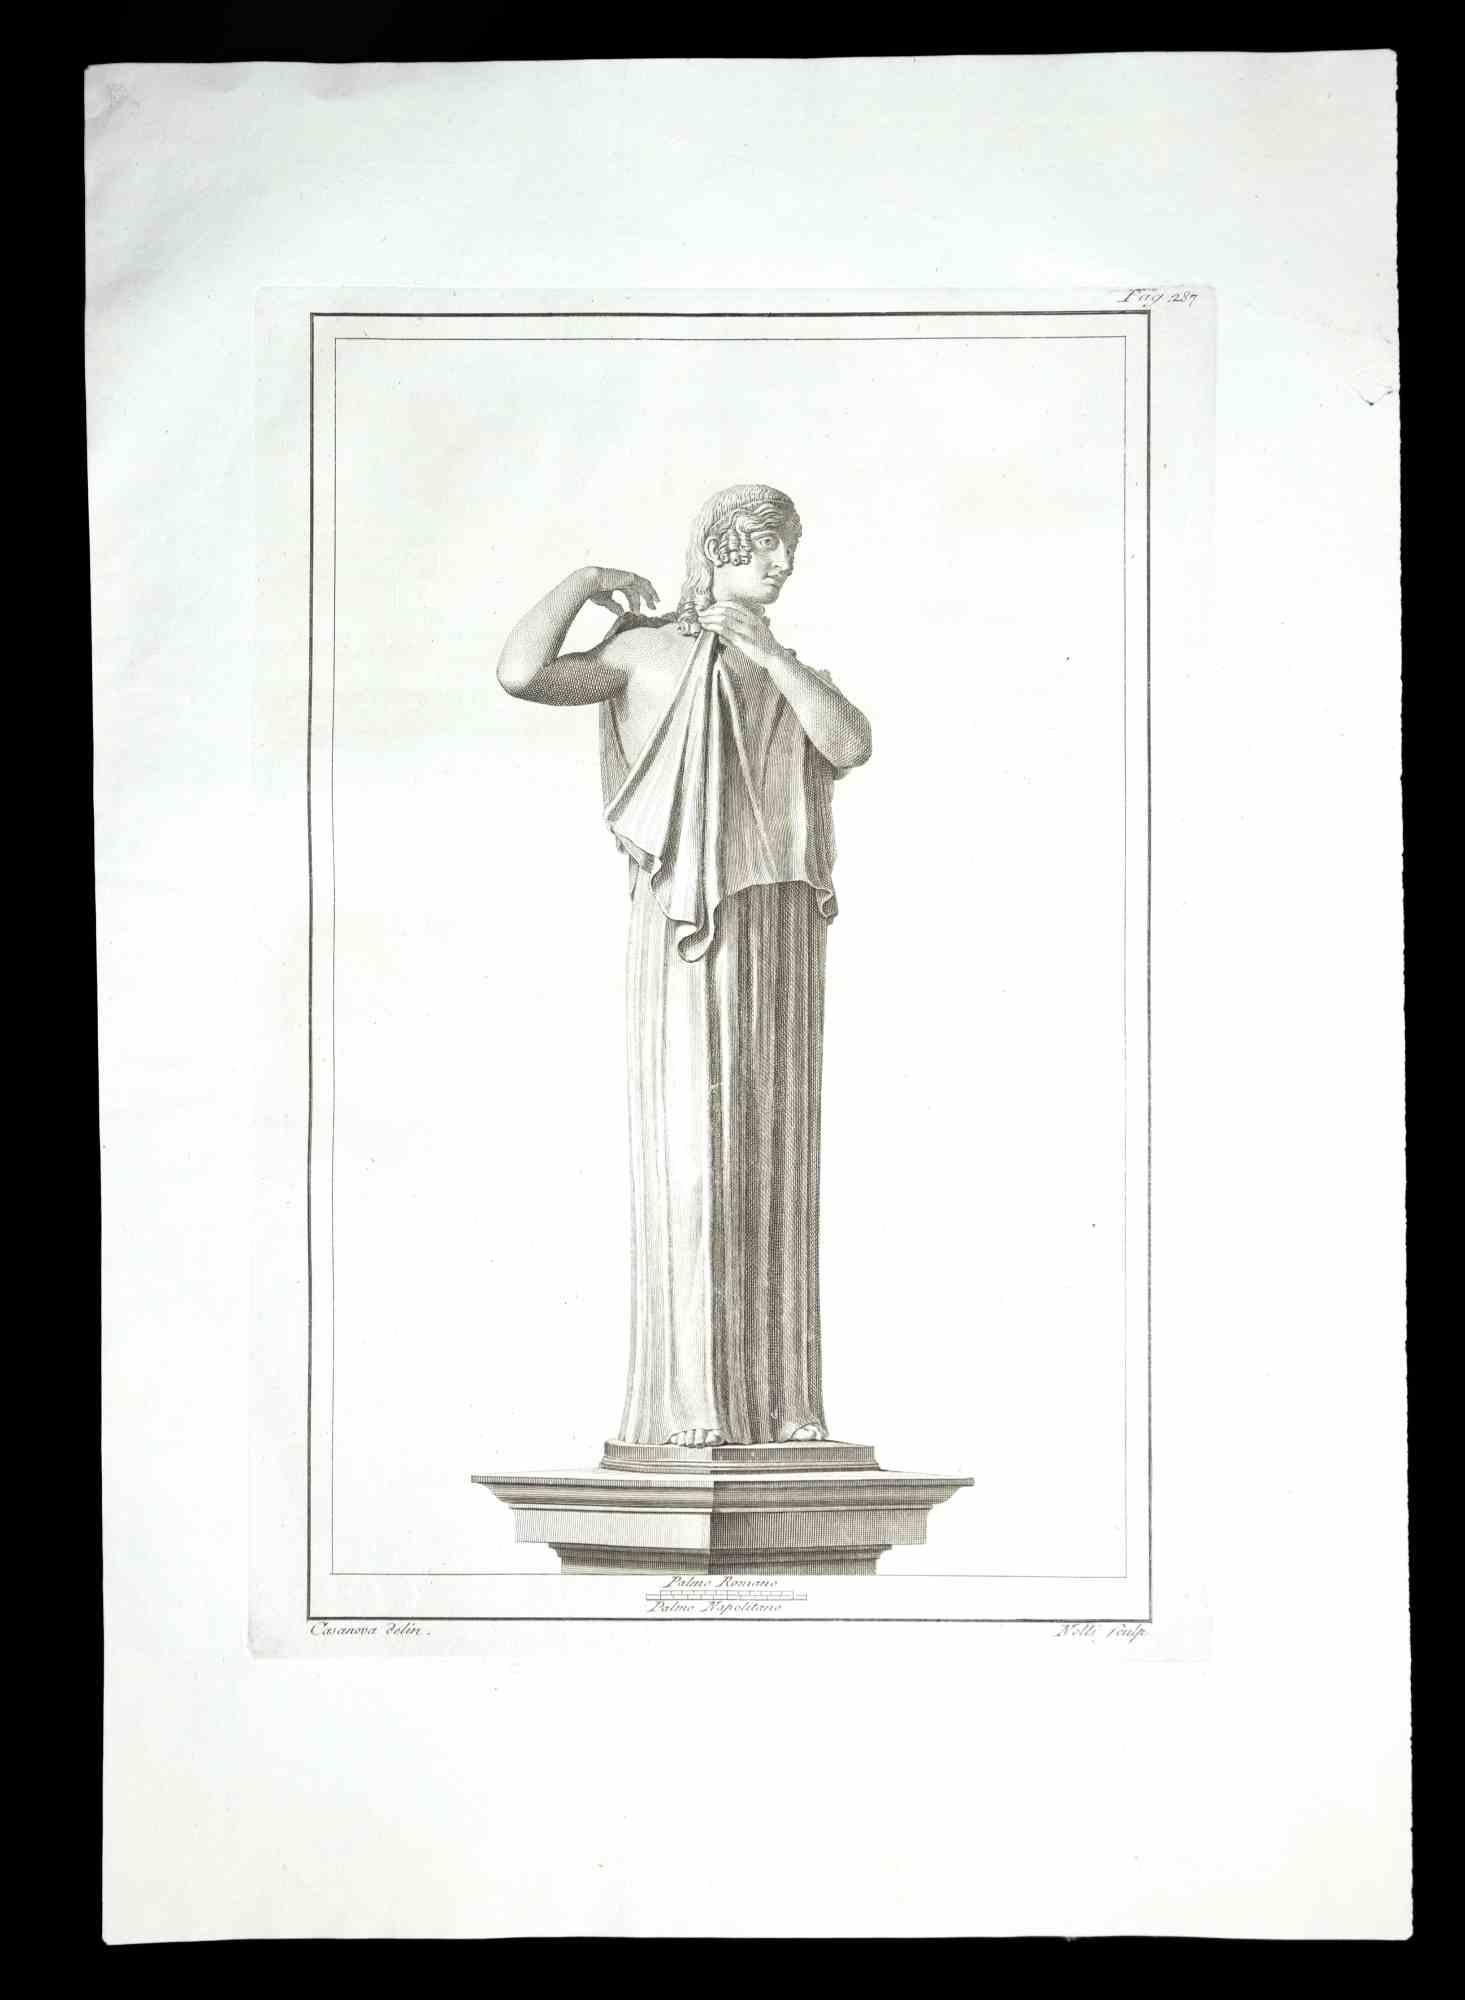 Ancient Roman statue, from the series "Antiquities of Herculaneum", is an original etching on paper realized by Carlo Nolli in the 18th century.

Signed on the plate, on the lower right.

Good conditions.

The etching belongs to the print suite